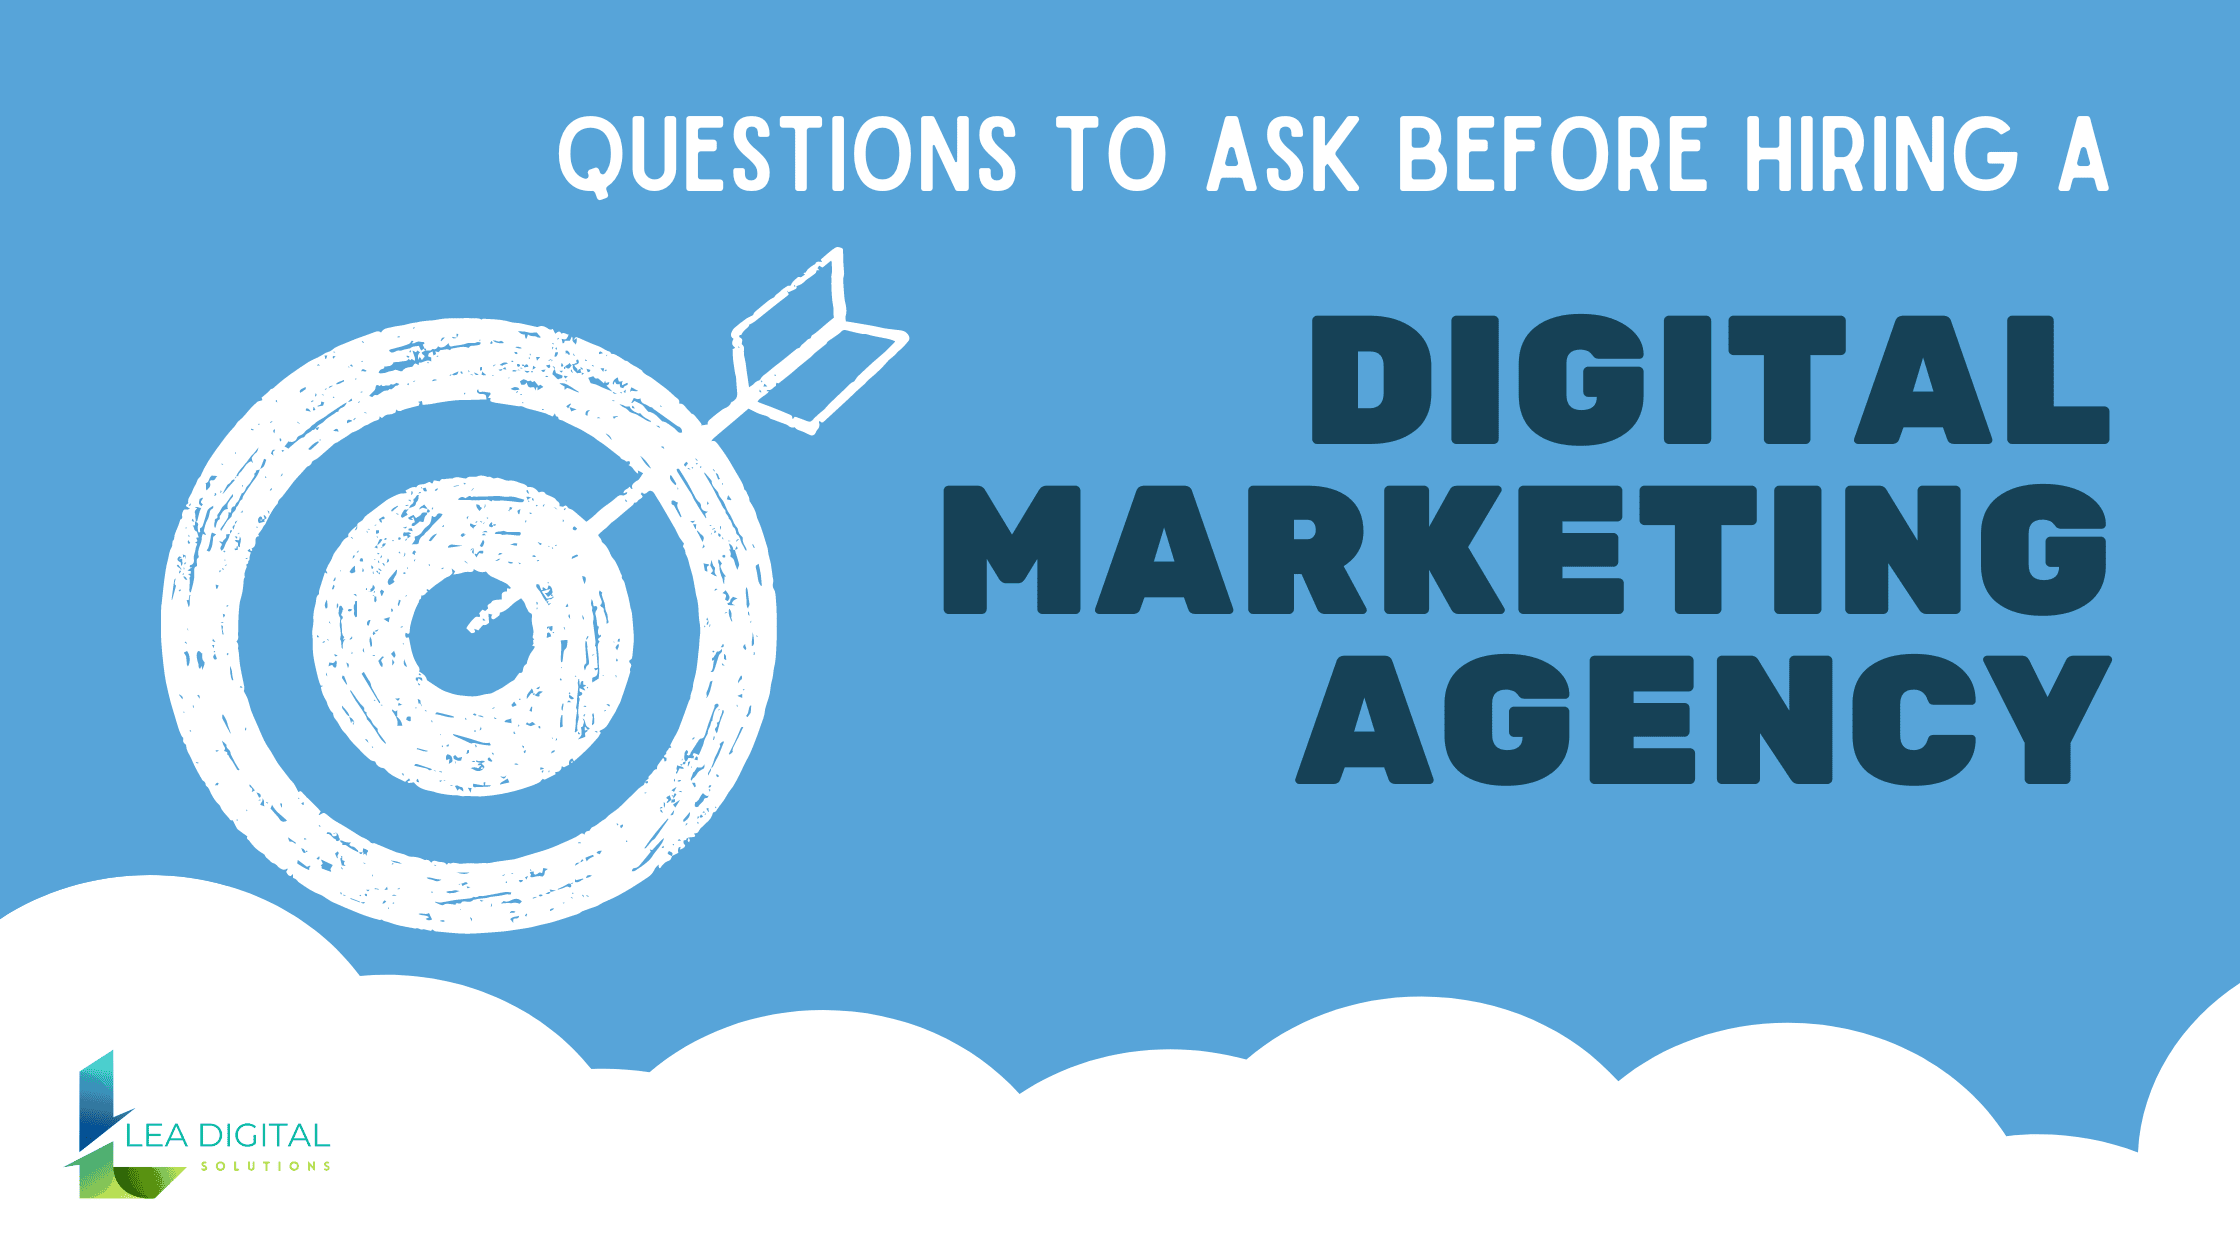 Questions to ask before hiring a digital marketing agency